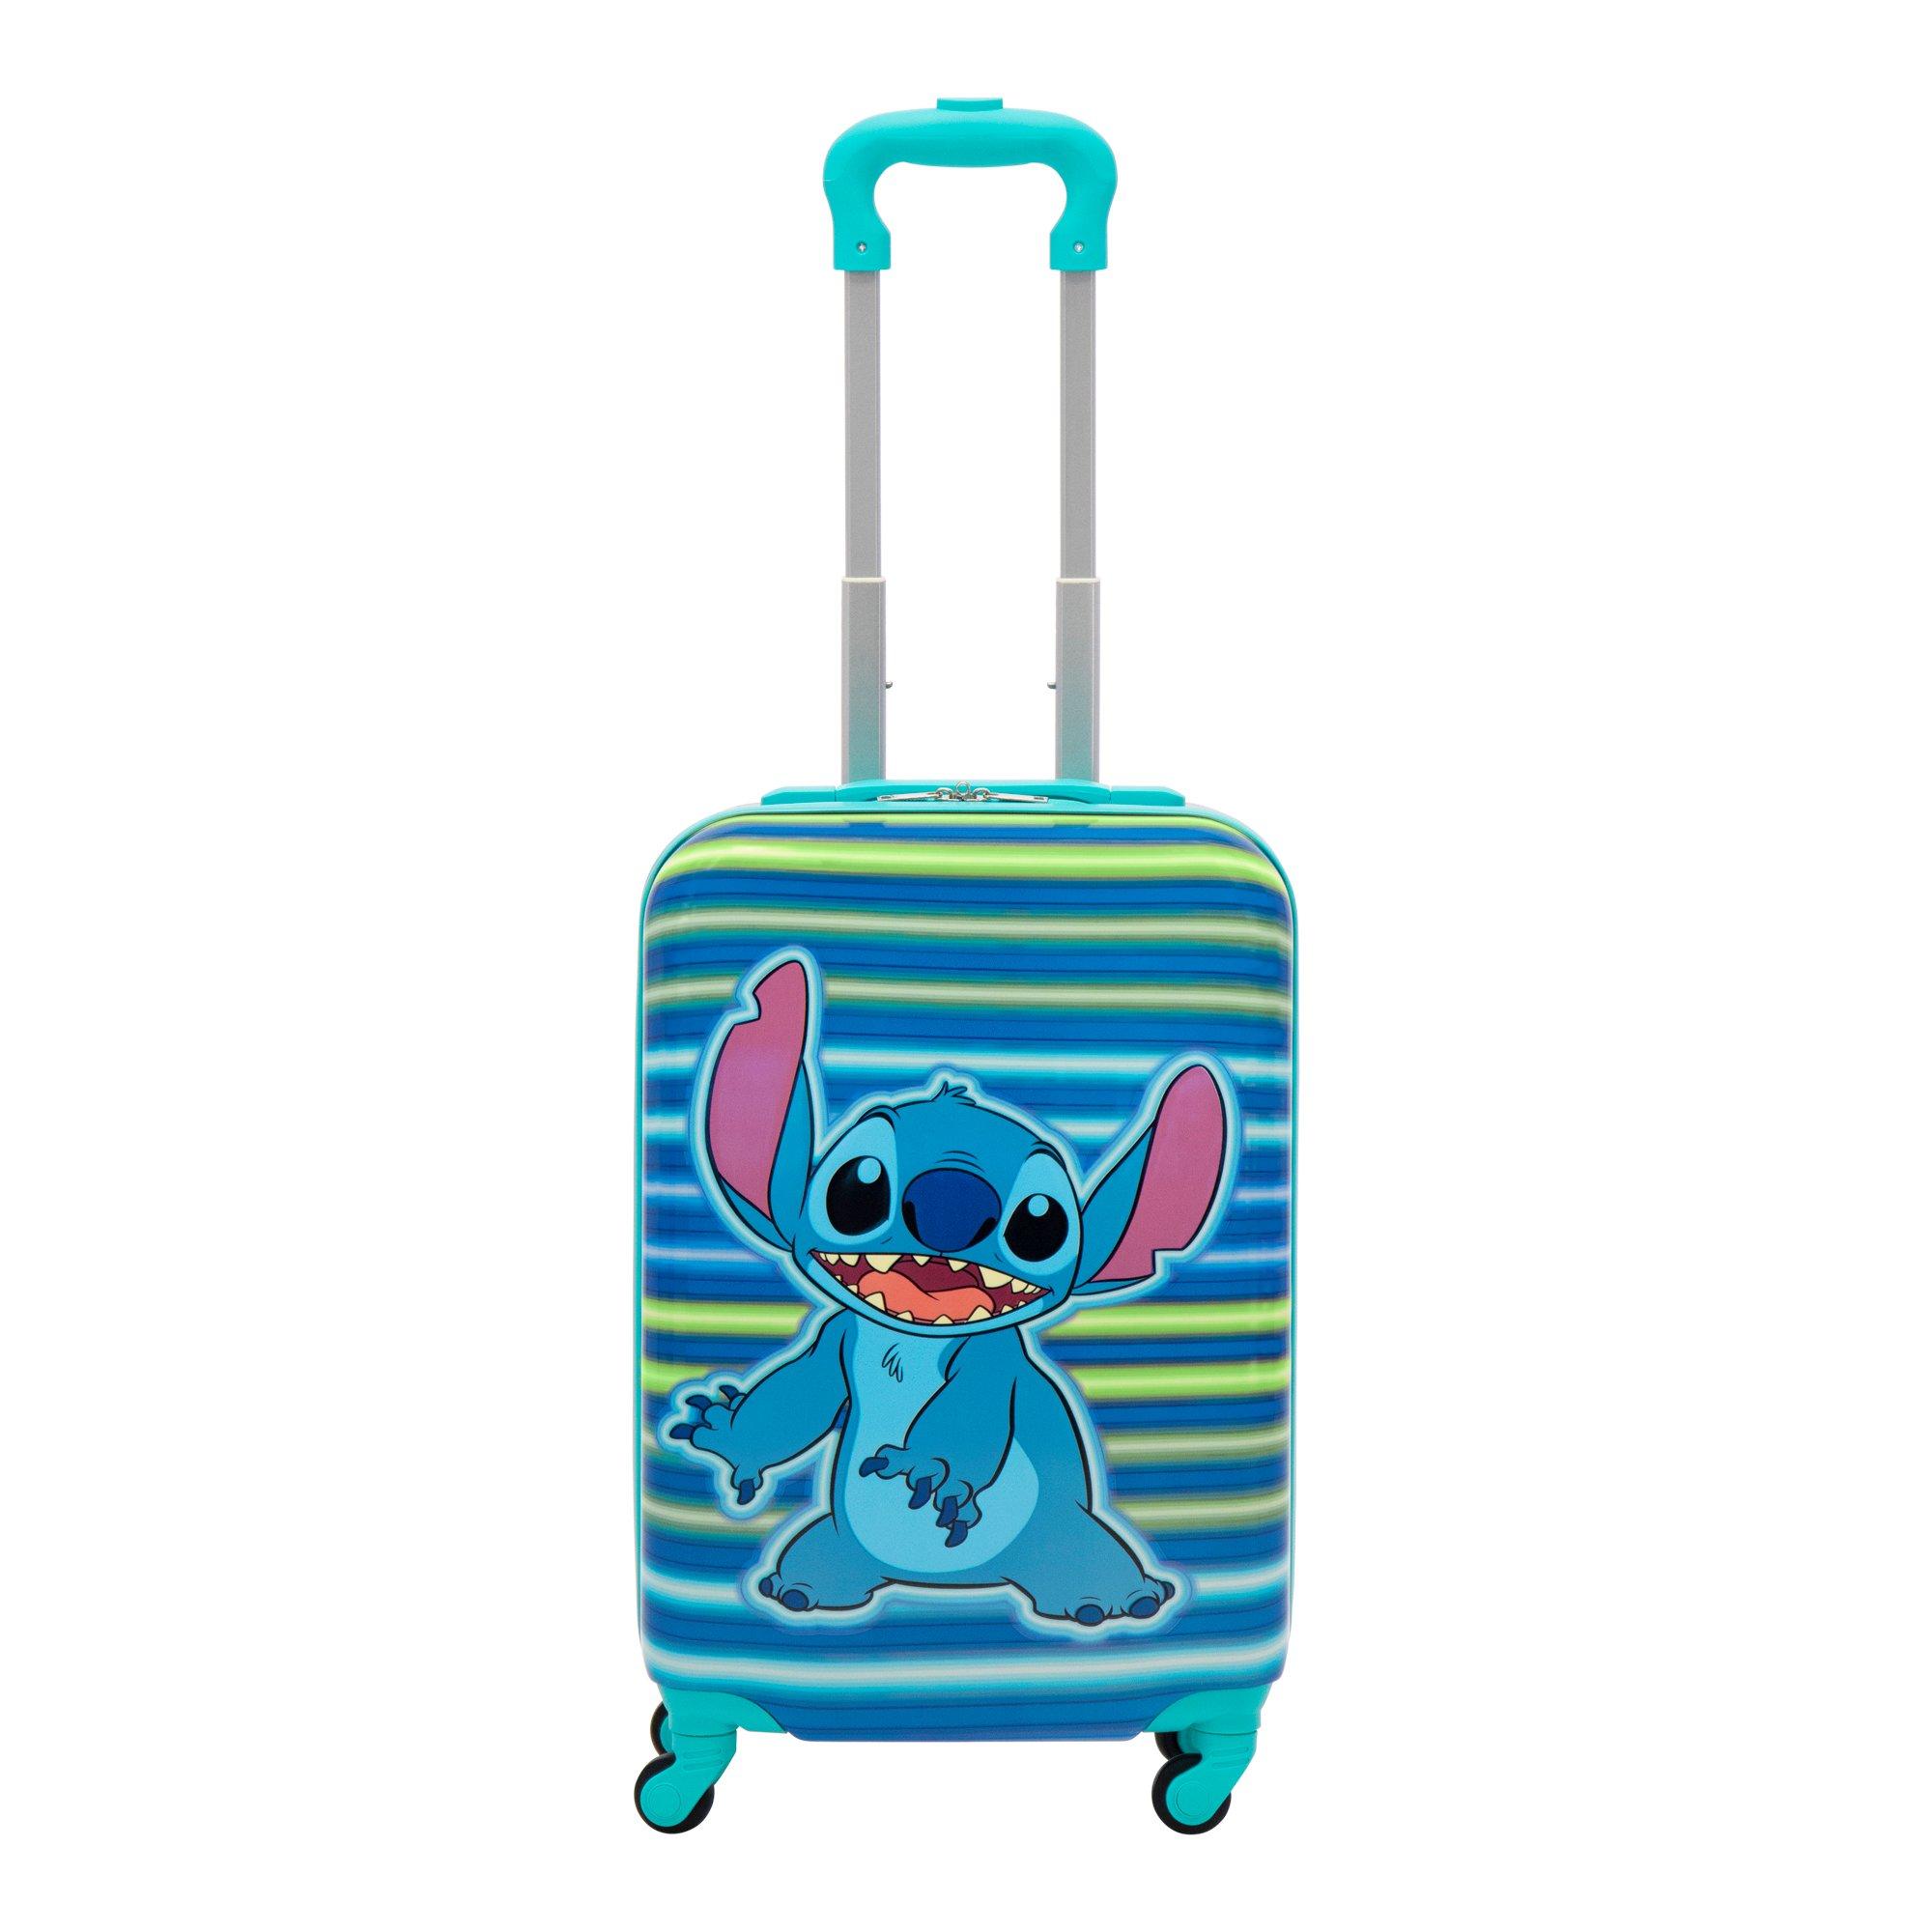 FUL Disney Lilo and Stitch Neon Print Kids 21-in Hard-Sided Roller Luggage